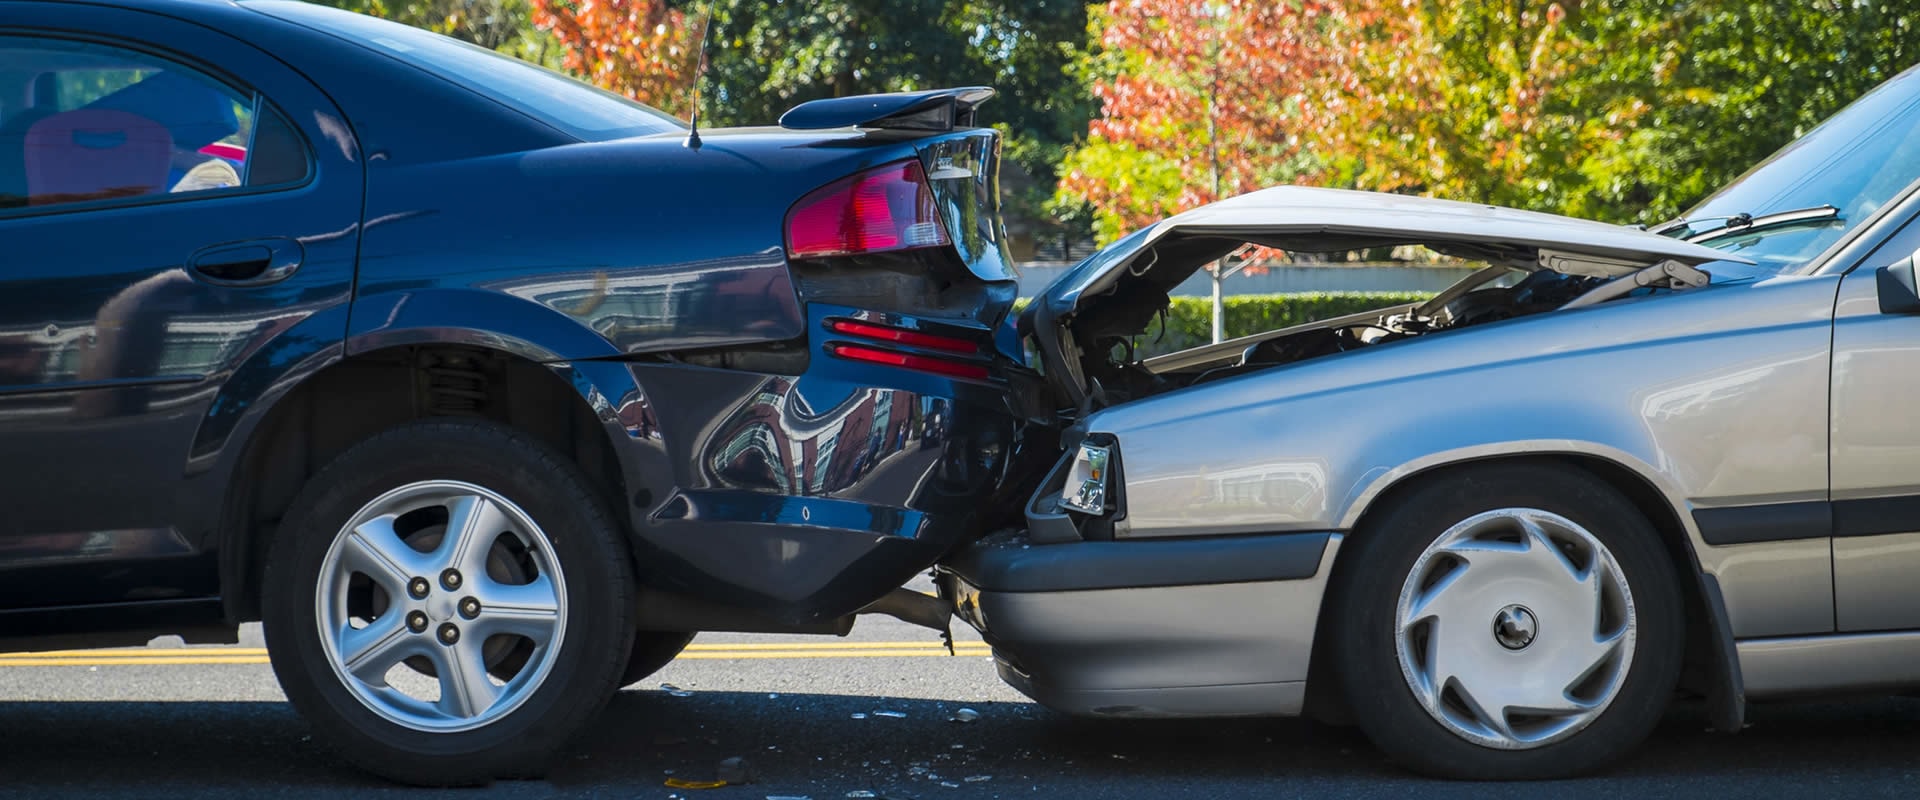 Pedestrian Accident Lawyer In Sacramento: What You Need To Know